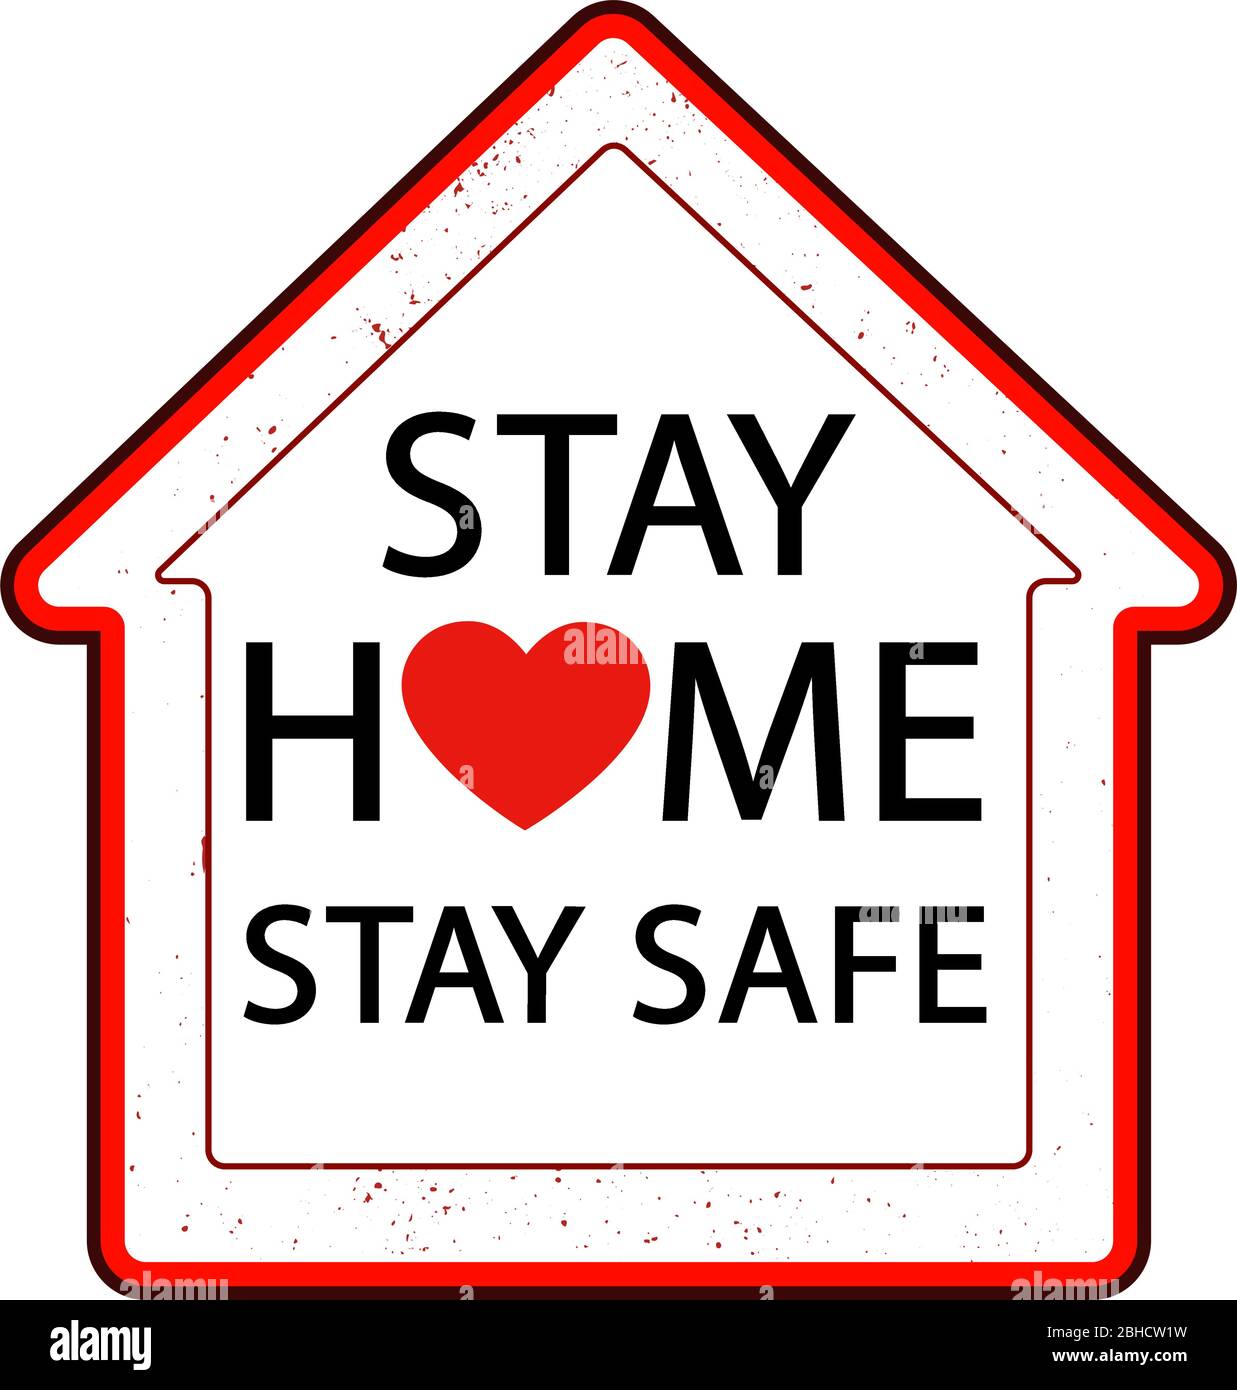 Stay home stay safe, stay alive save lives. Icon ...